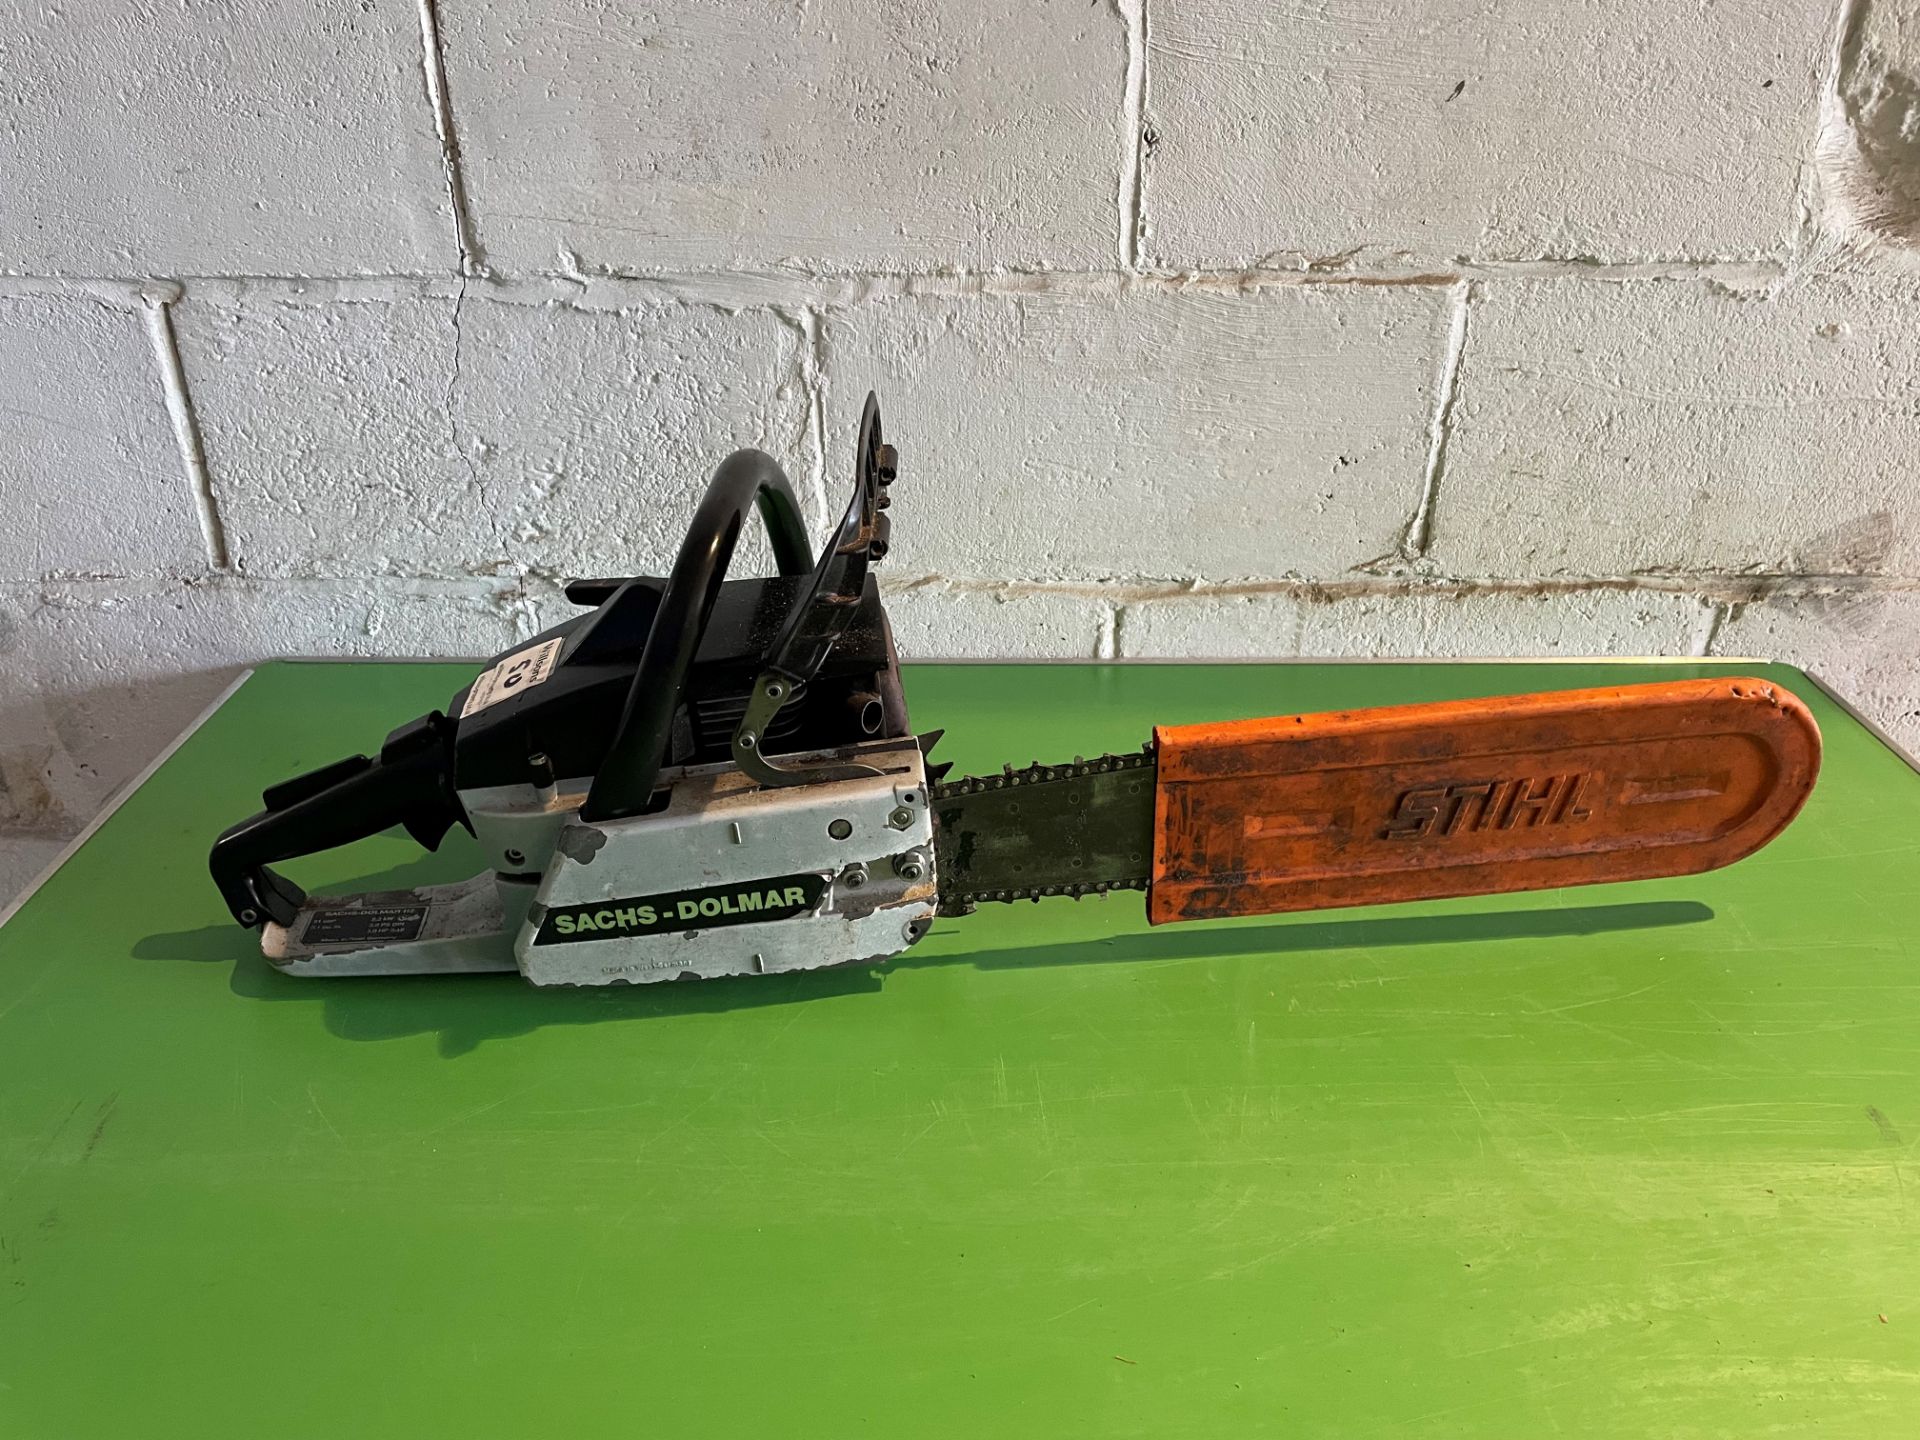 Sachs-Dolmer 112 petrol engine chainsaw with visor & oil & misc